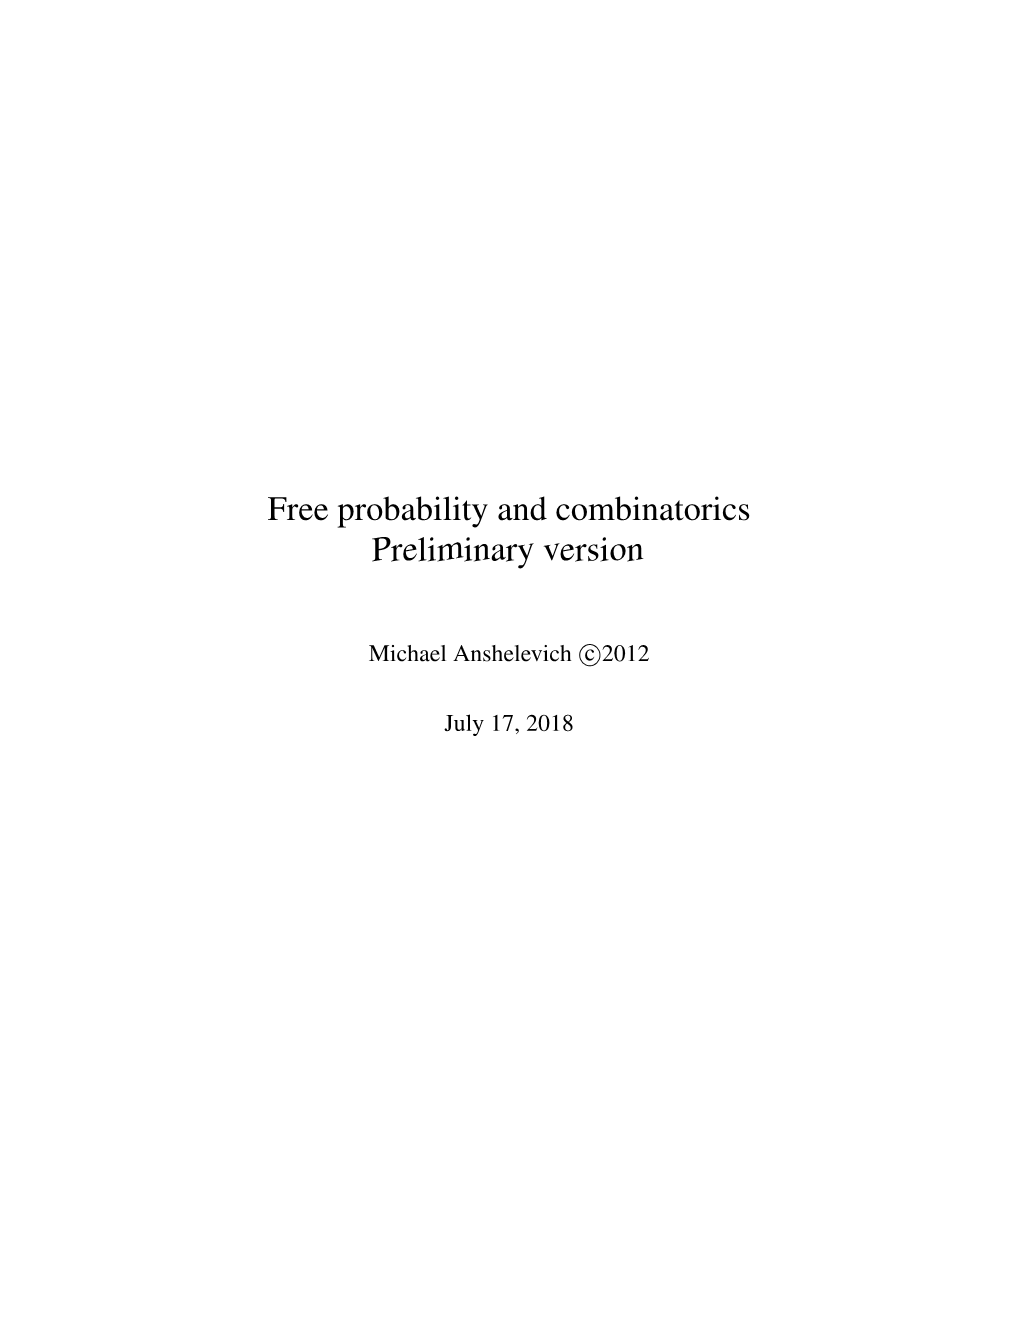 Free Probability Notes